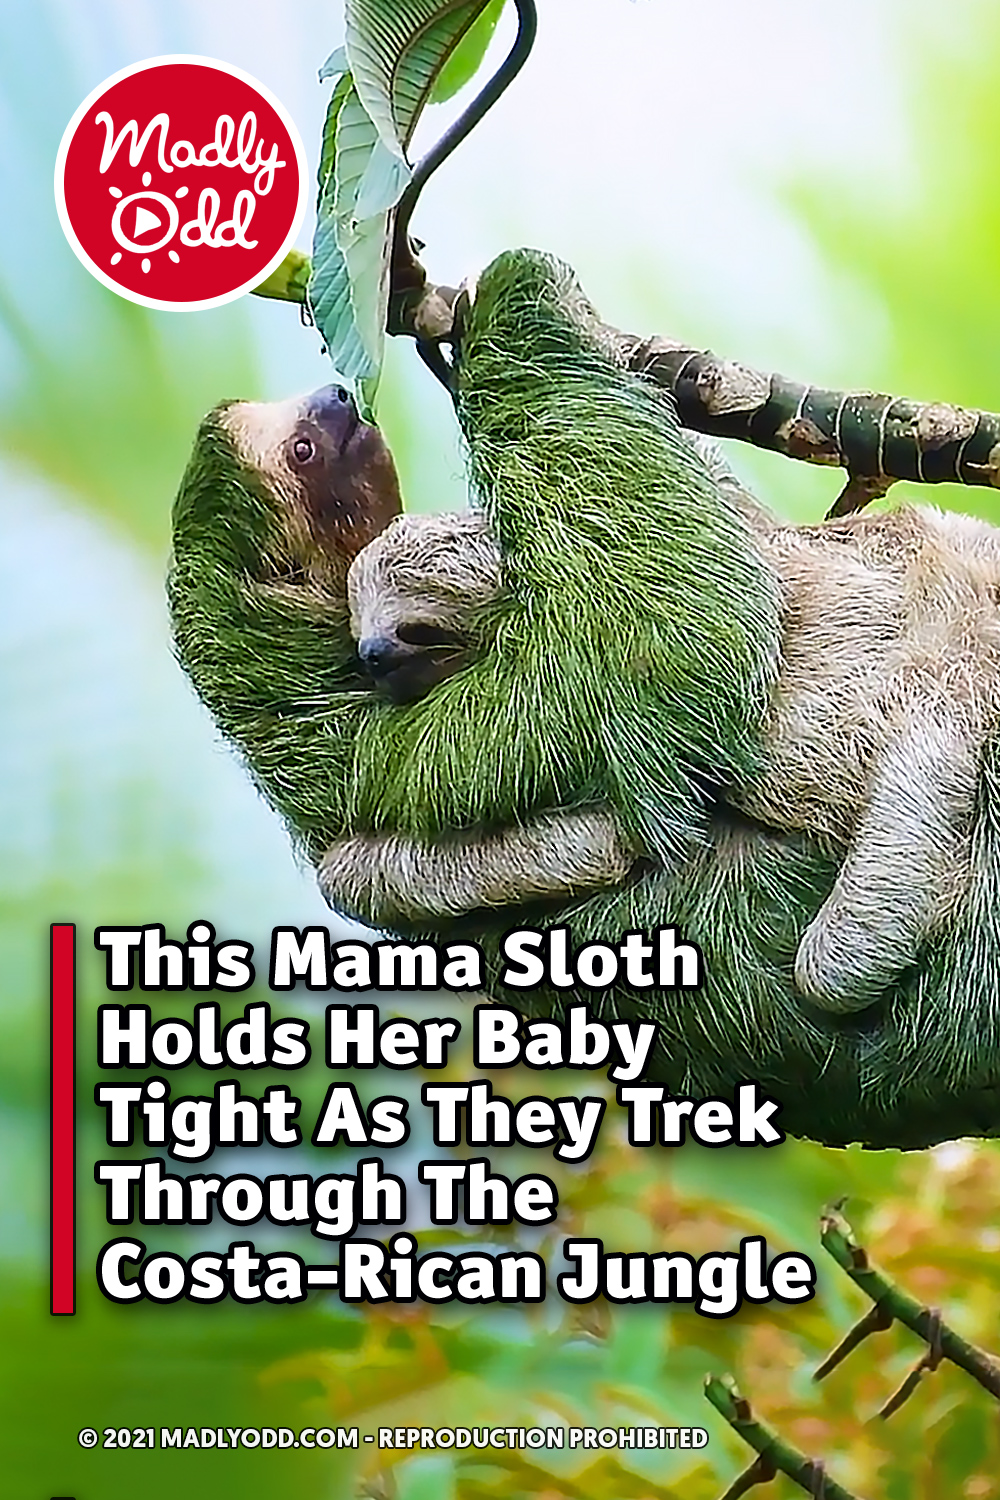 This Mama Sloth Holds Her Baby Tight As They Trek Through The Costa-Rican Jungle